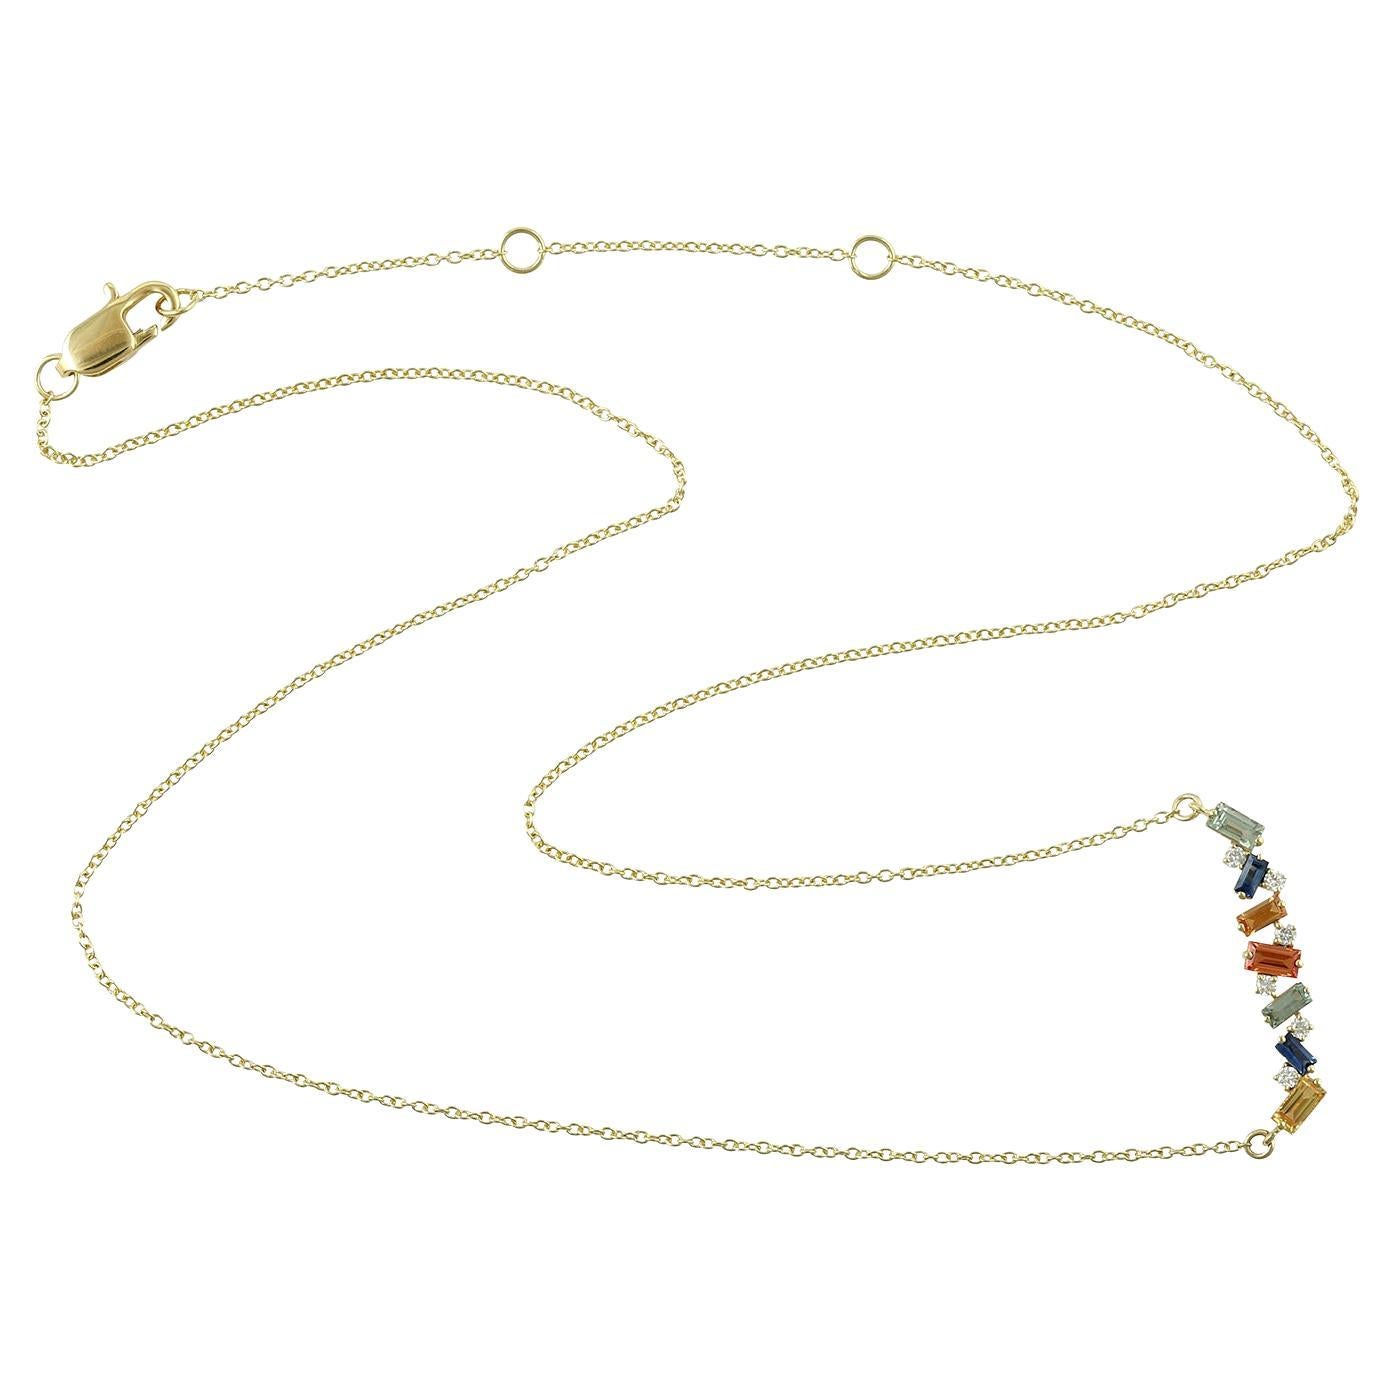 Rainbow Sapphire & Diamonds Pendant Chain Necklace Made In 18k Yellow Gold